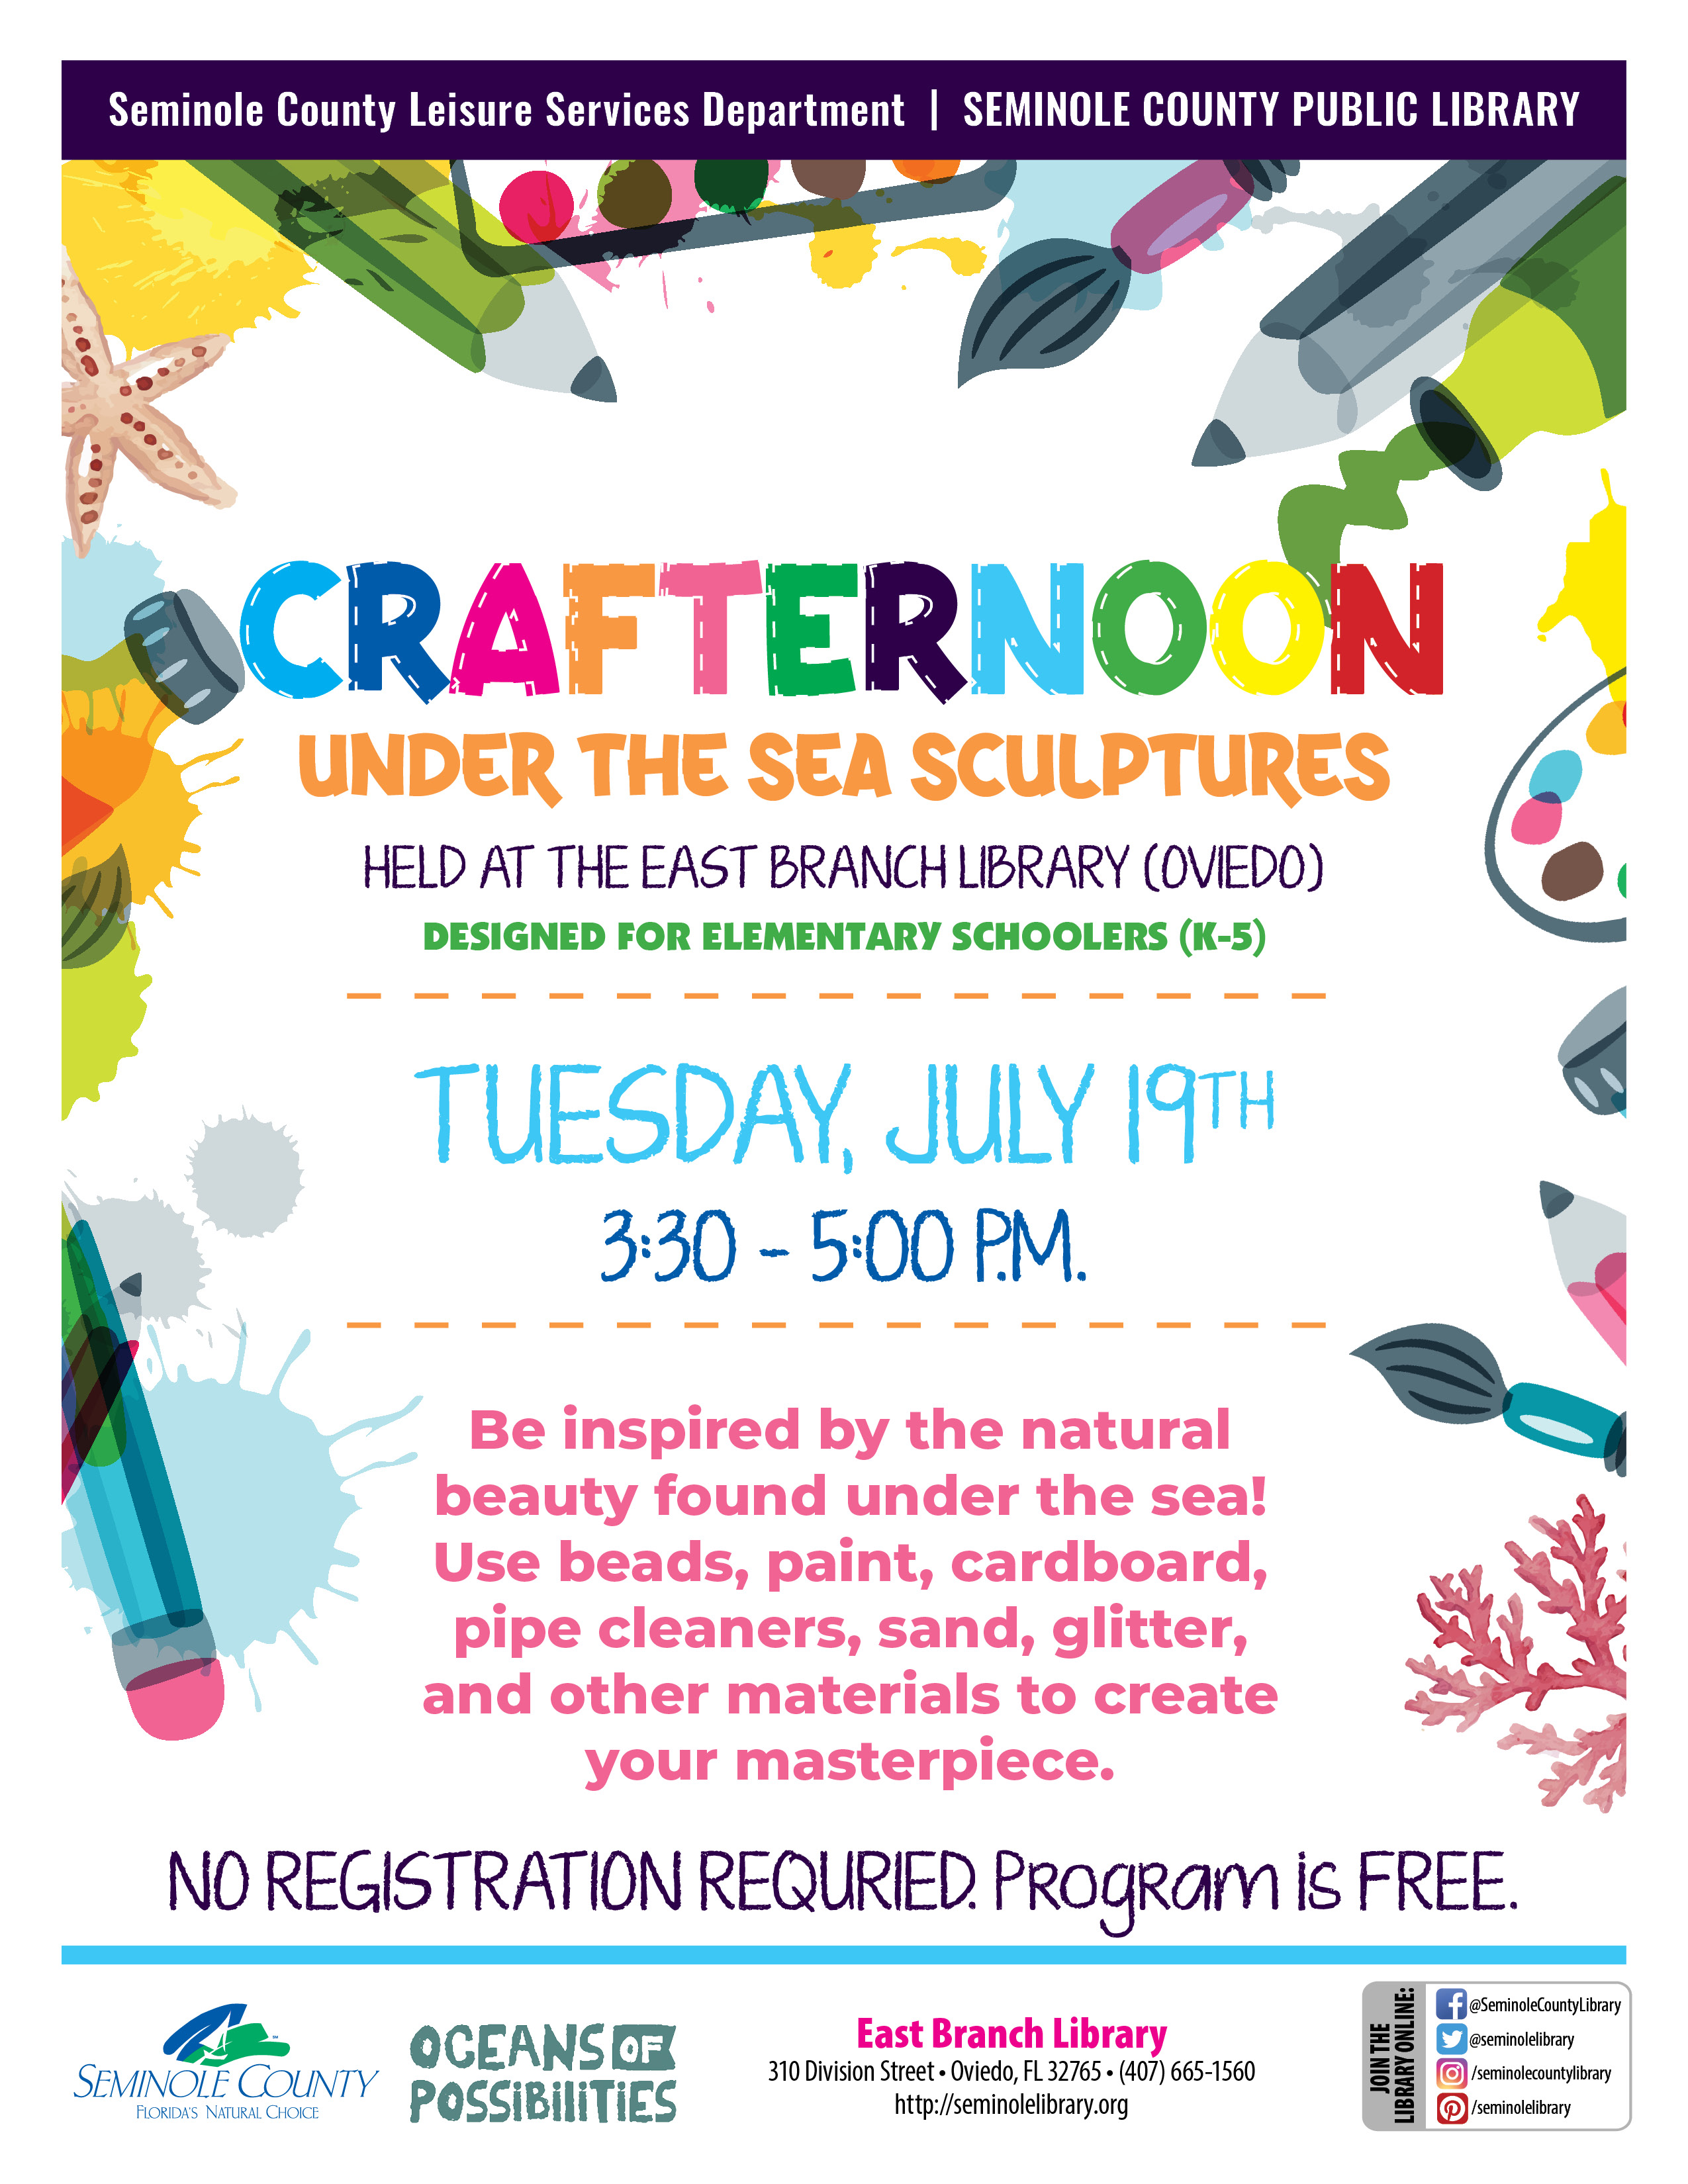 Crafternoon - Under the Sea Sculptures at East Branch Library